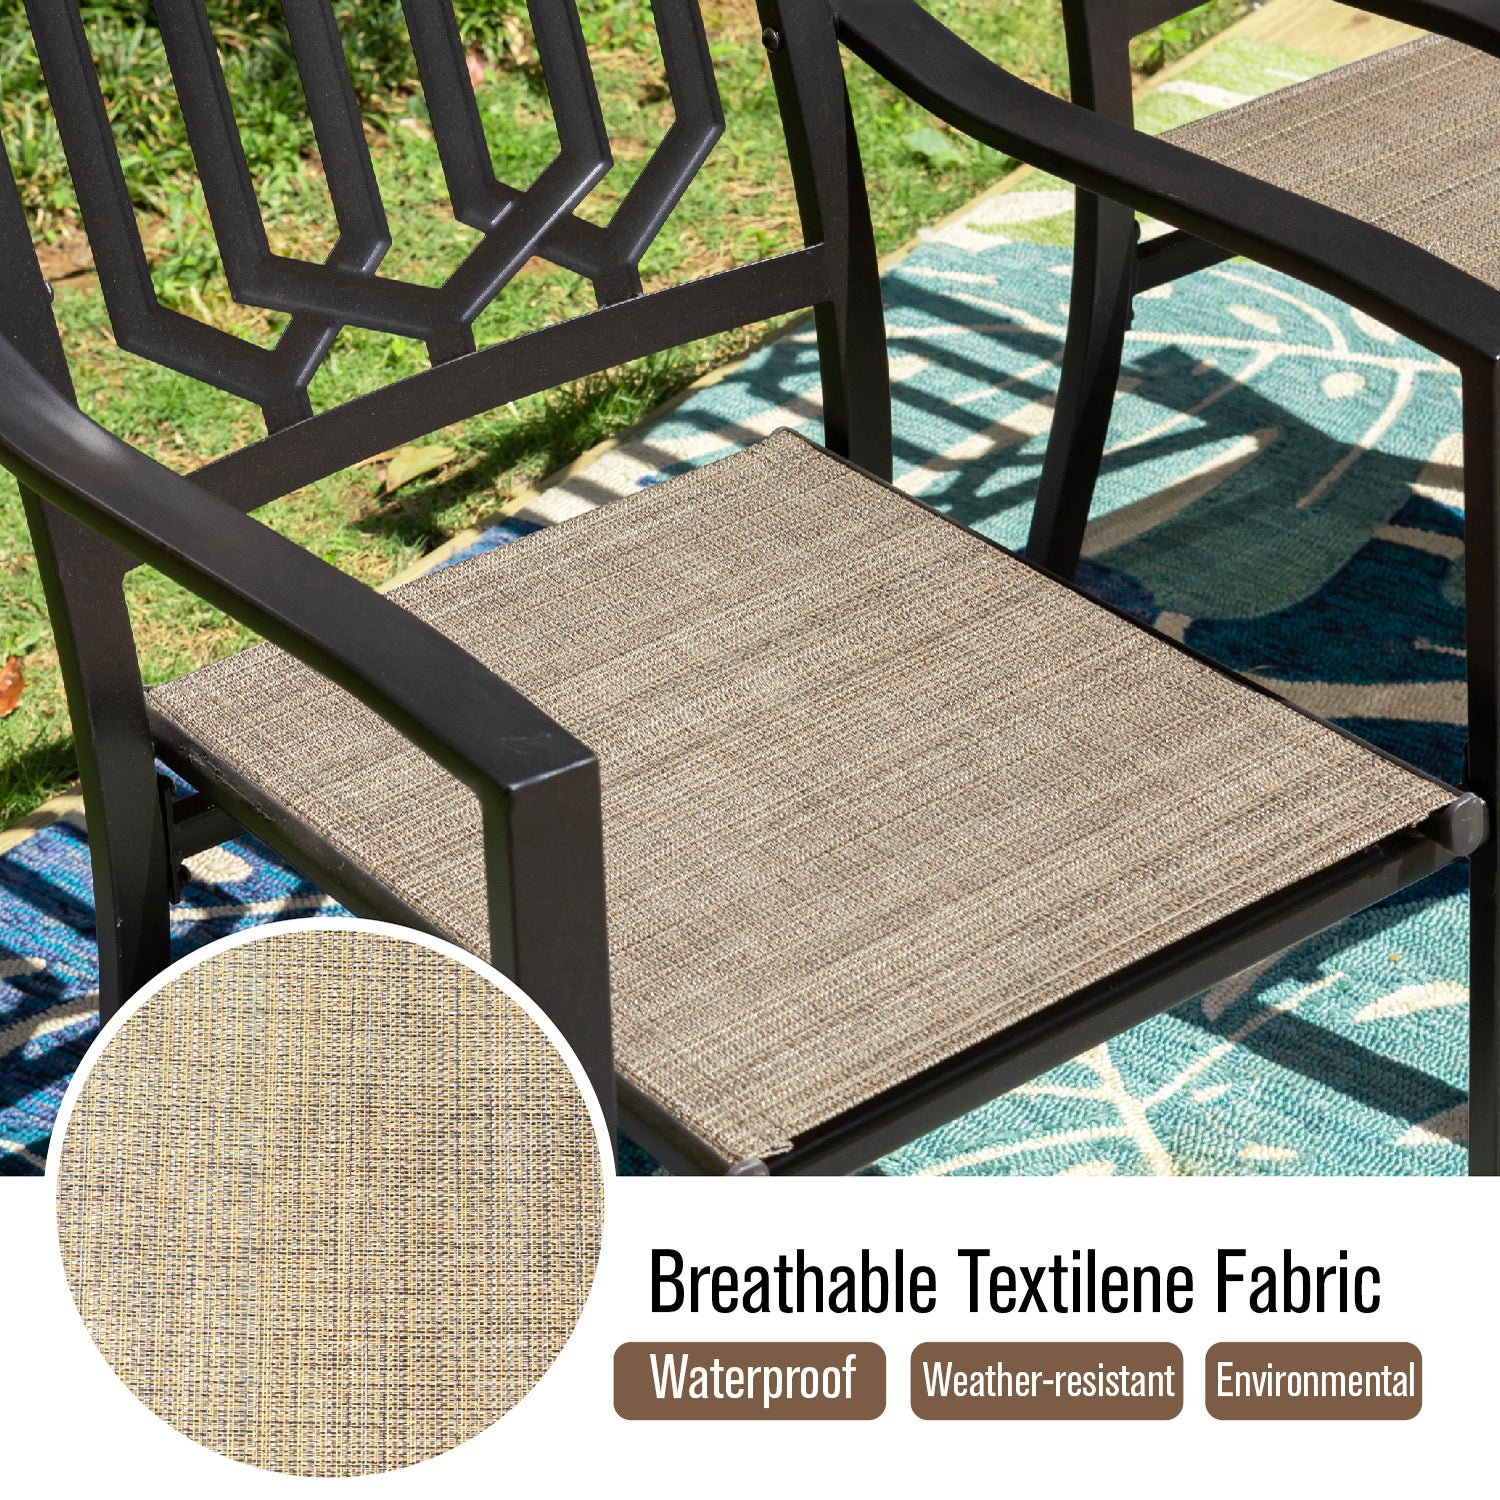 Sophia & William 7-Piece Wood-look Table and Textilene Seat Chairs Outdoor Patio Dining Set